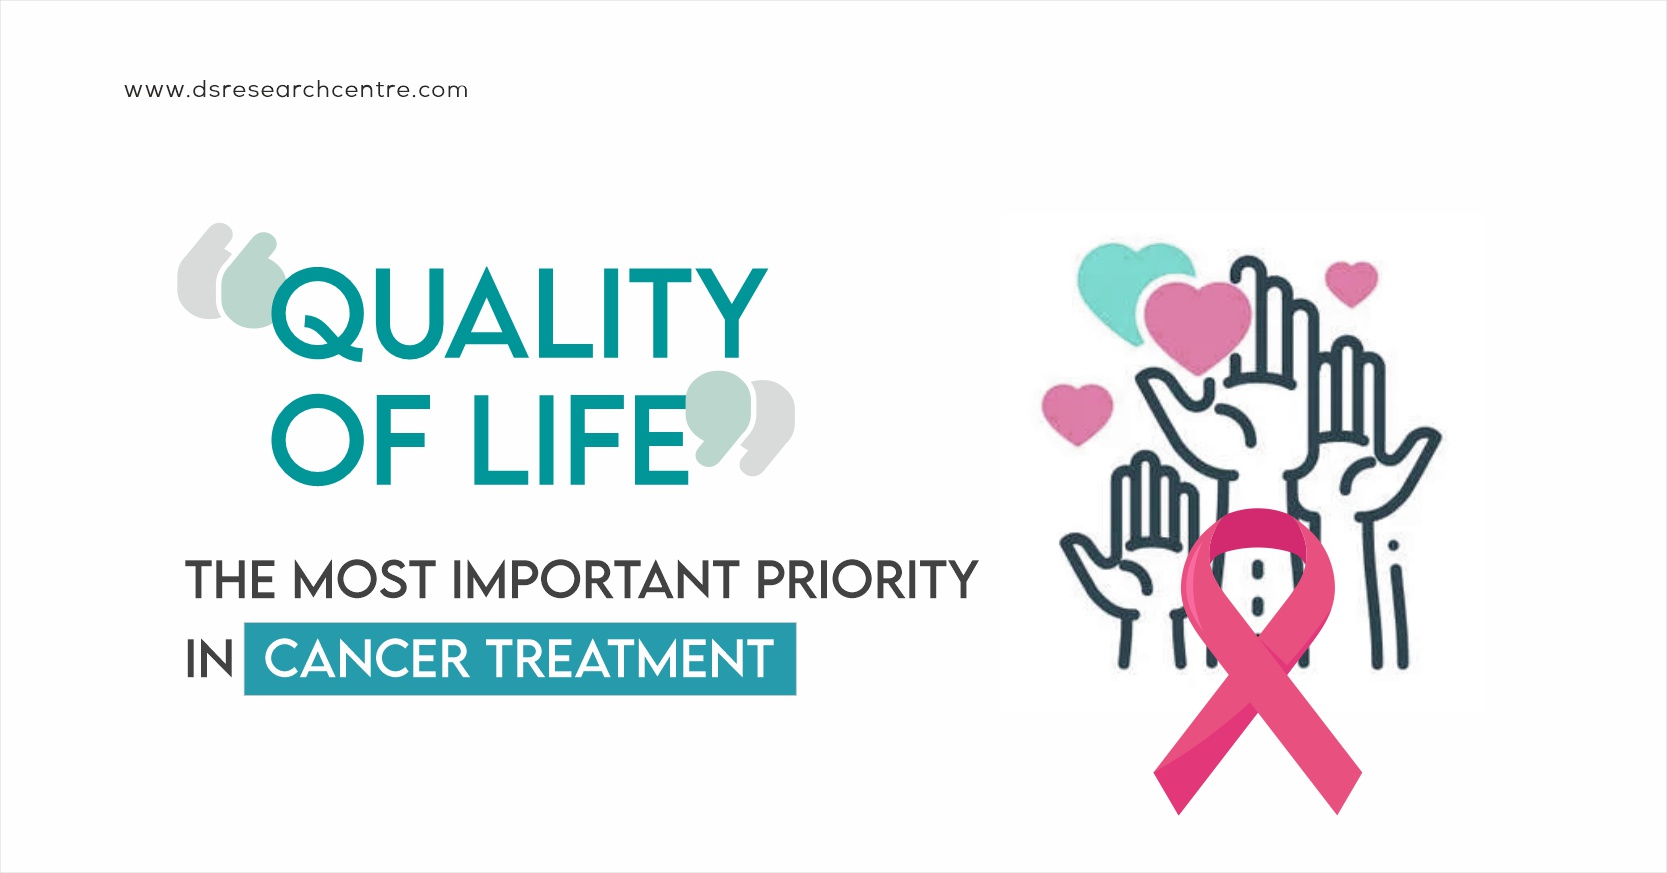 "Quality of life" the most important priority in cancer treatment